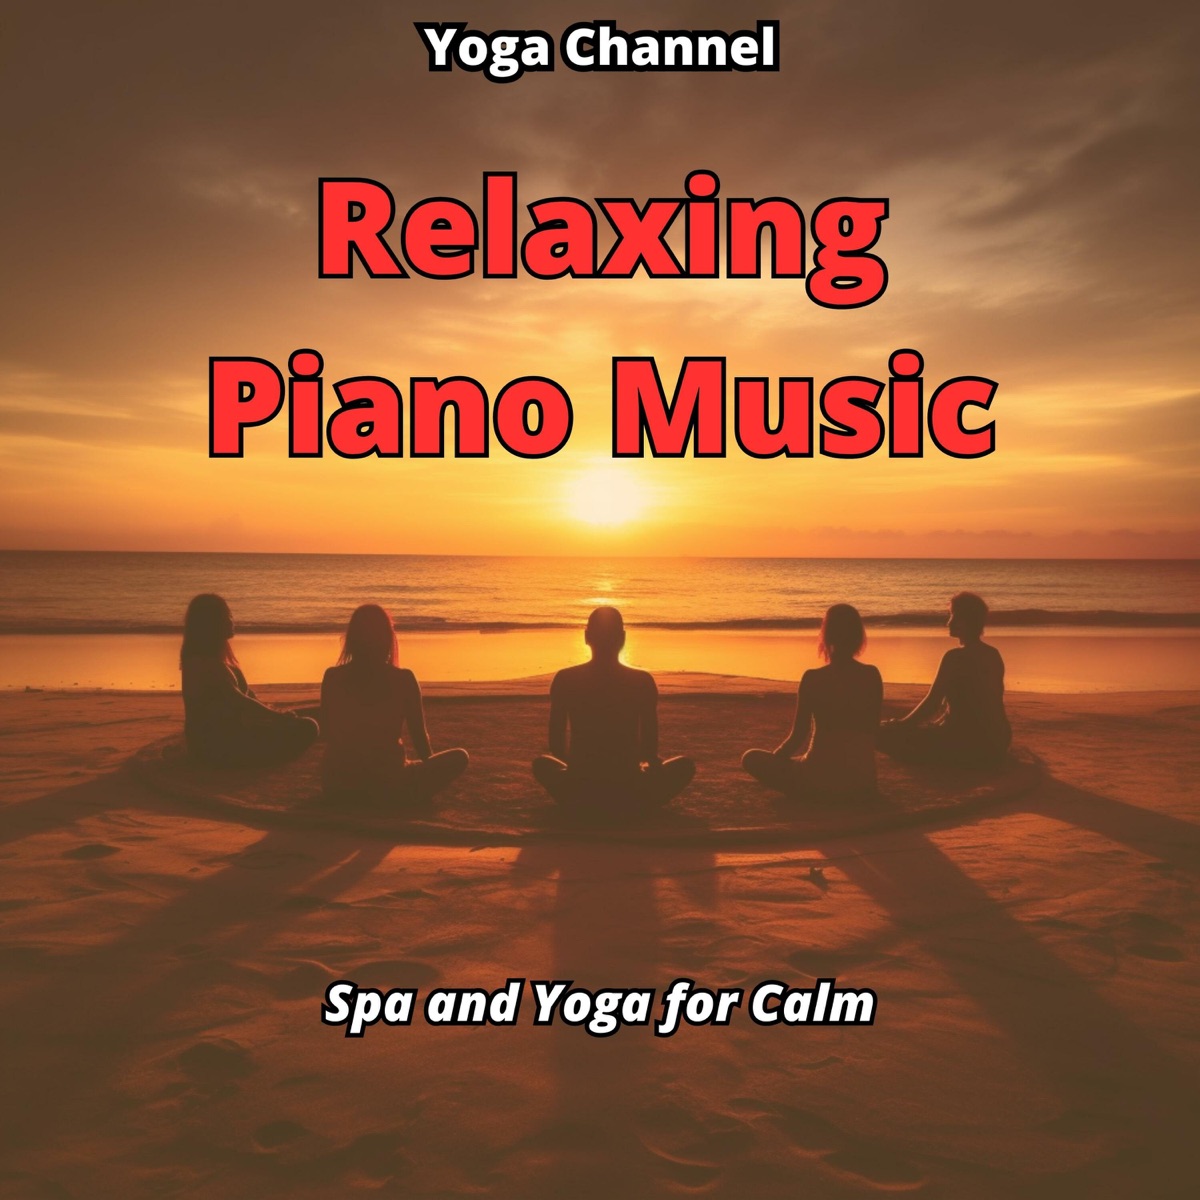 Yoga Workout Music: Relaxing and Calm Piano Music for Yoga, Spa, Meditation  Concentration Focus, Massage Therapy and Yoga Music